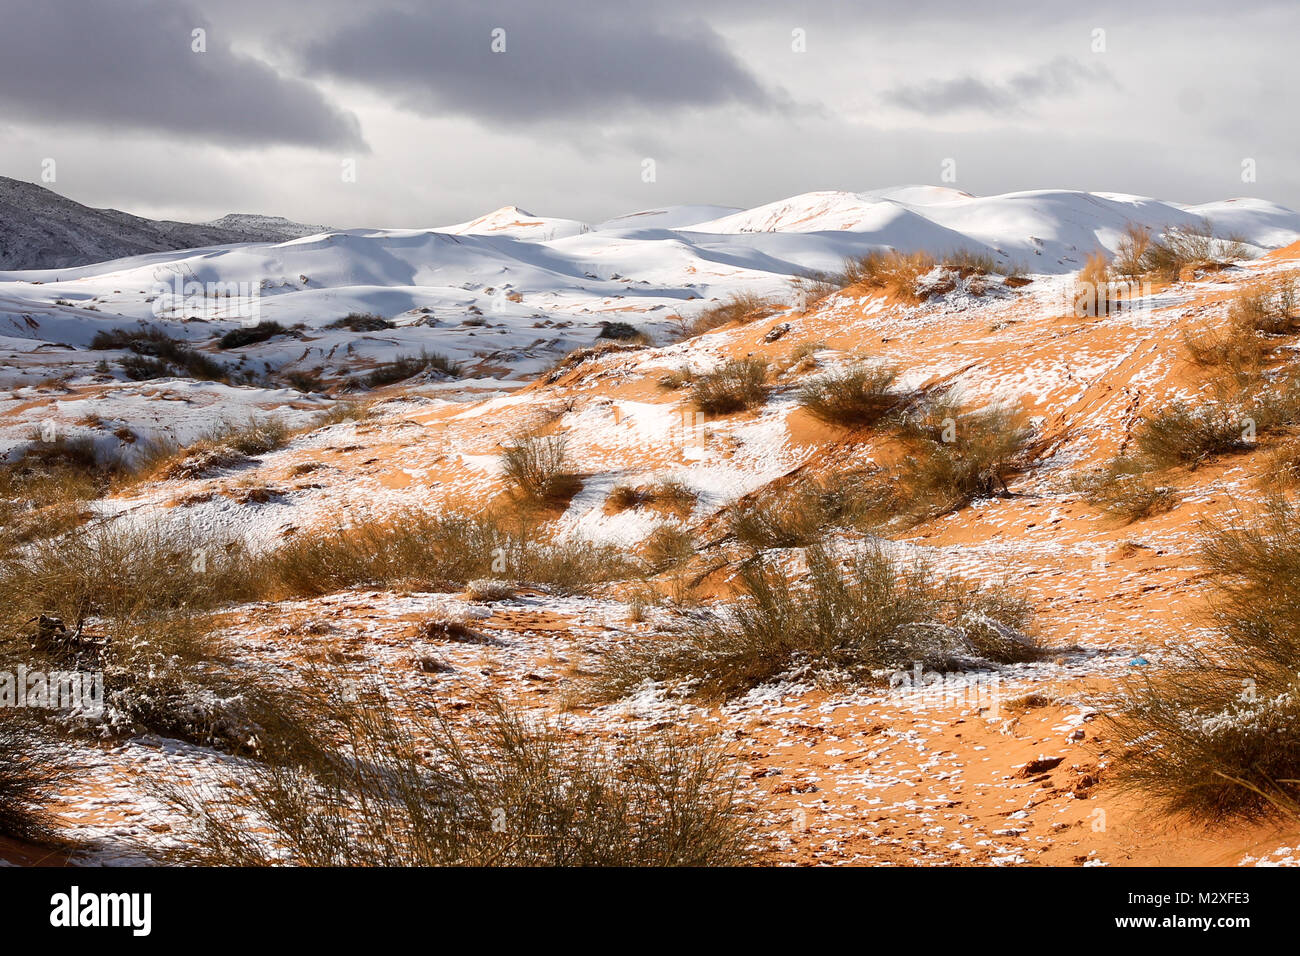 The snow in the Sahara Desert on Tuesday morning (Feb 6th) near Ain Sefra ,Algeria.The snow fell on Monday afternoon but has yet to melt,normally the snow melts within hours of it falling.  Locals were stunned to see snow on the SAND DUNES in the Sahara Desert  after it snowed for the second time this year, following nearly four decades without it. Stock Photo